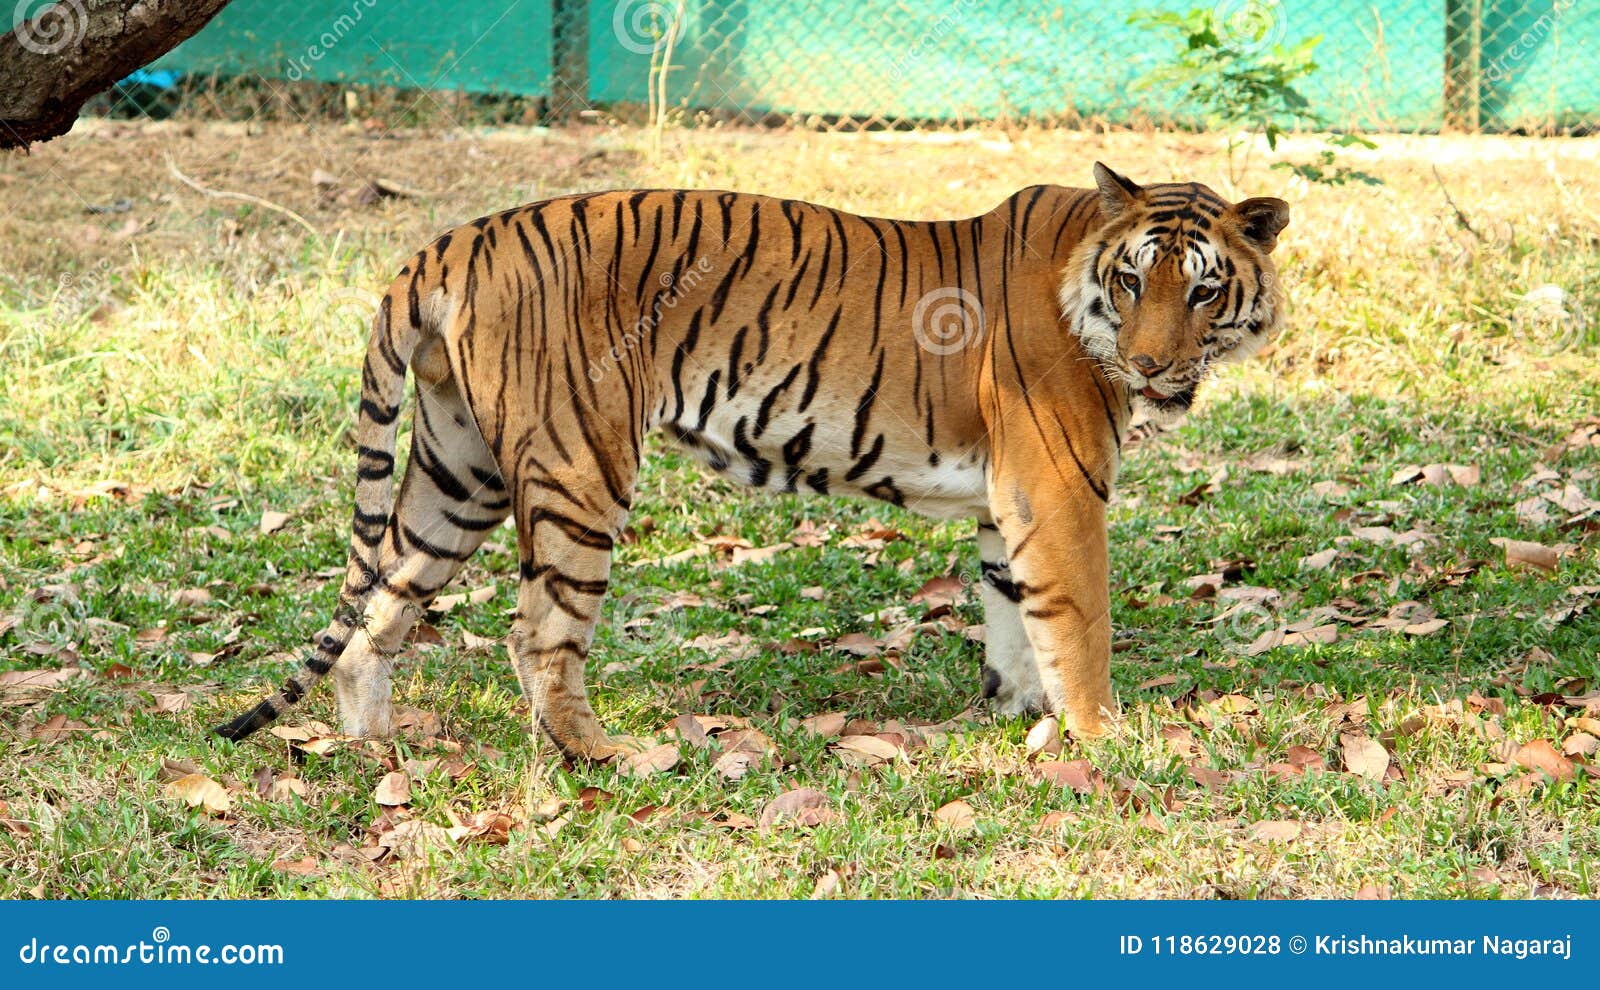 Tiger in National Zoo India Stock Photo - Image of wildcat, india: 118629028